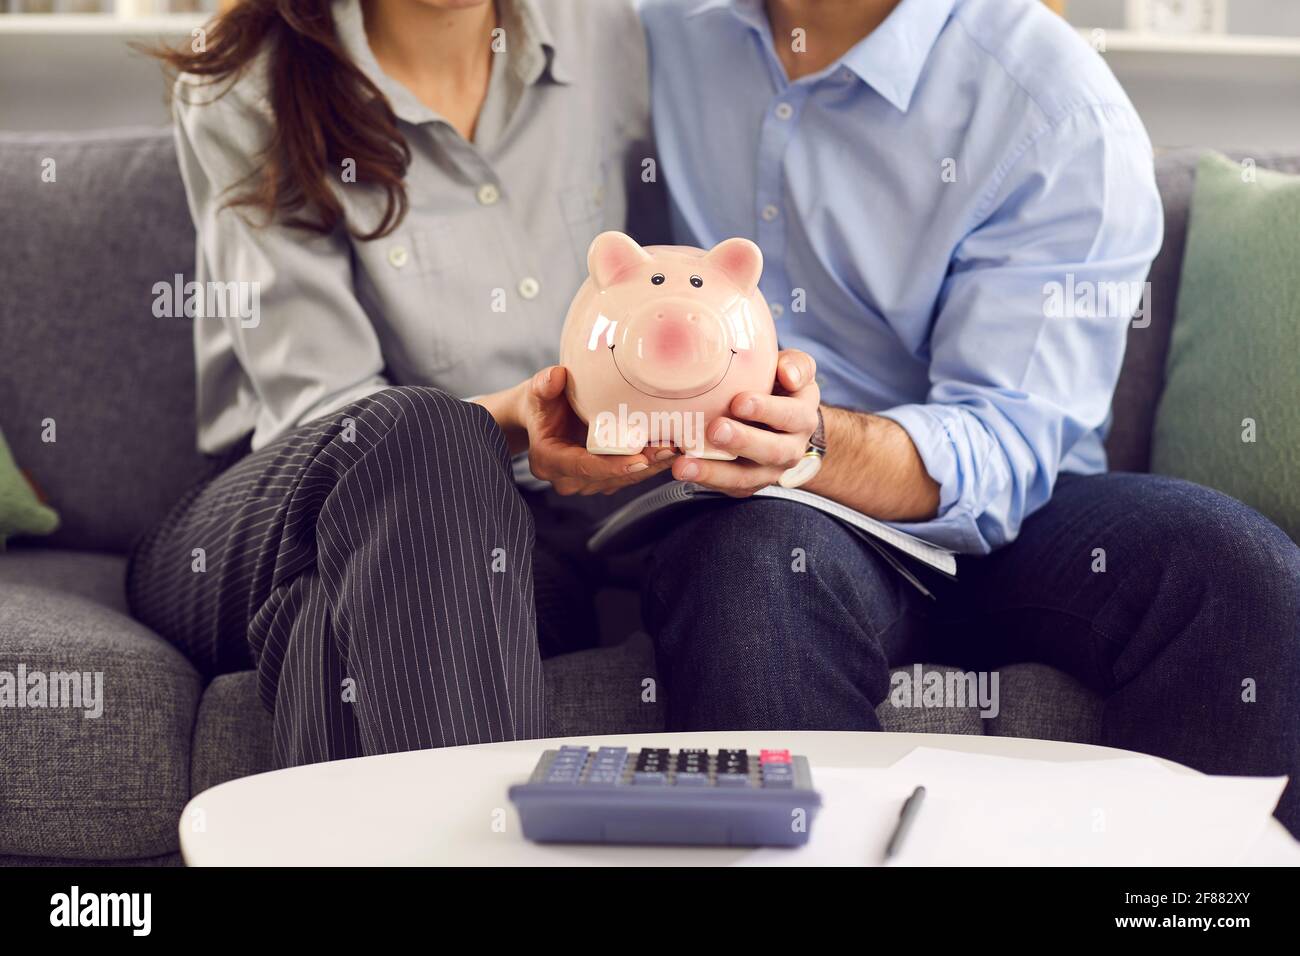 Cropped image of a piggy bank in the hands of a young family planning their budget. Stock Photo